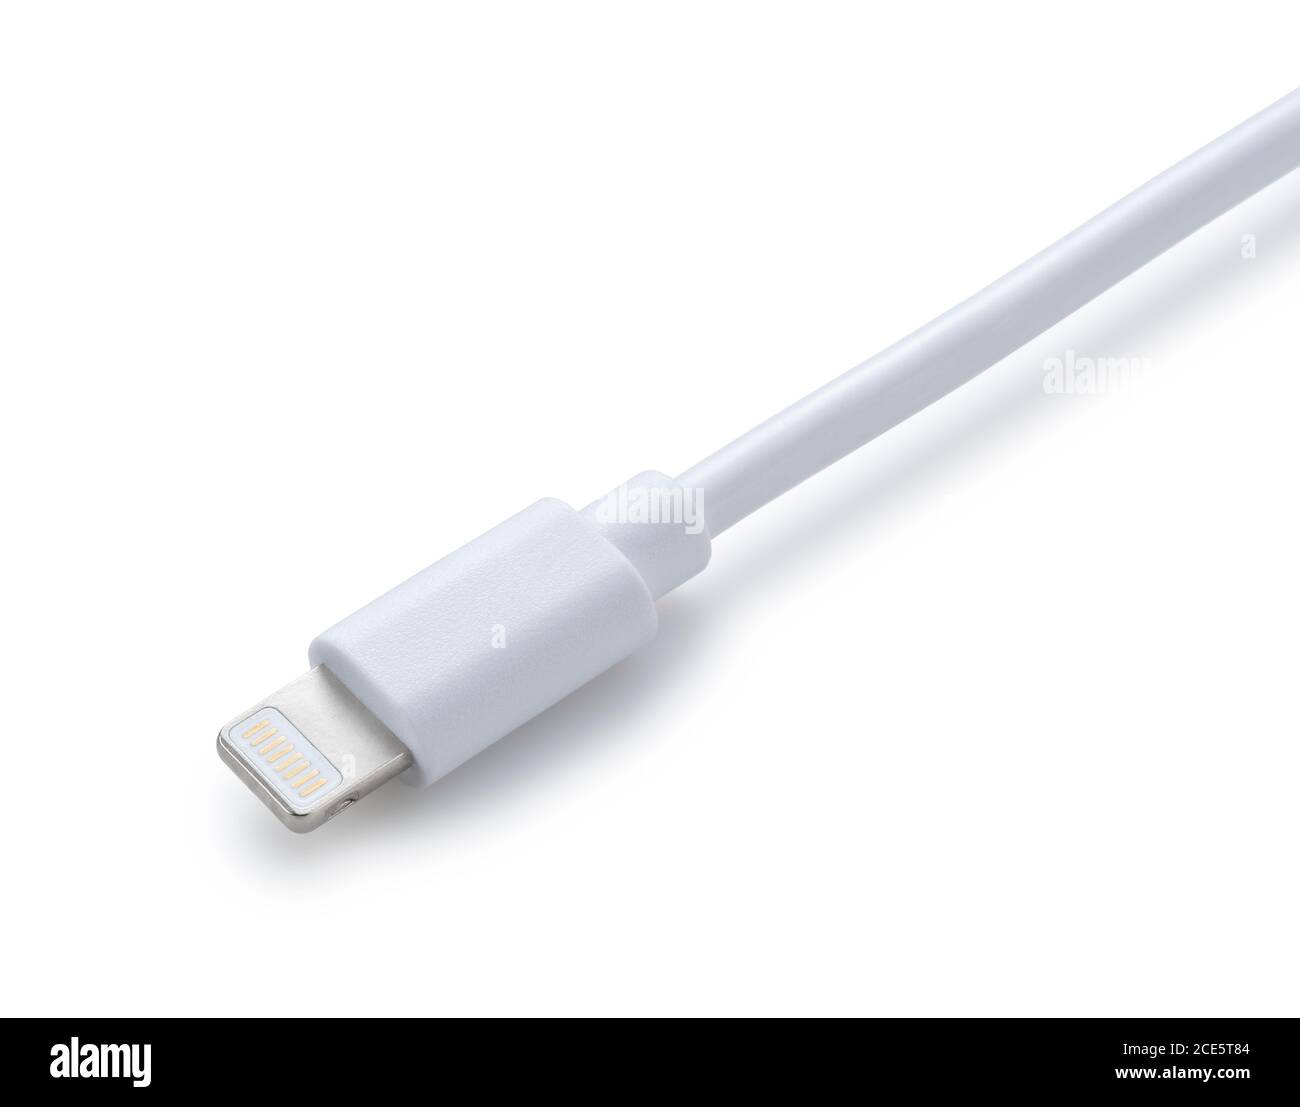 Shooting a lightning cable placed on a blue background from an angle Stock Photo